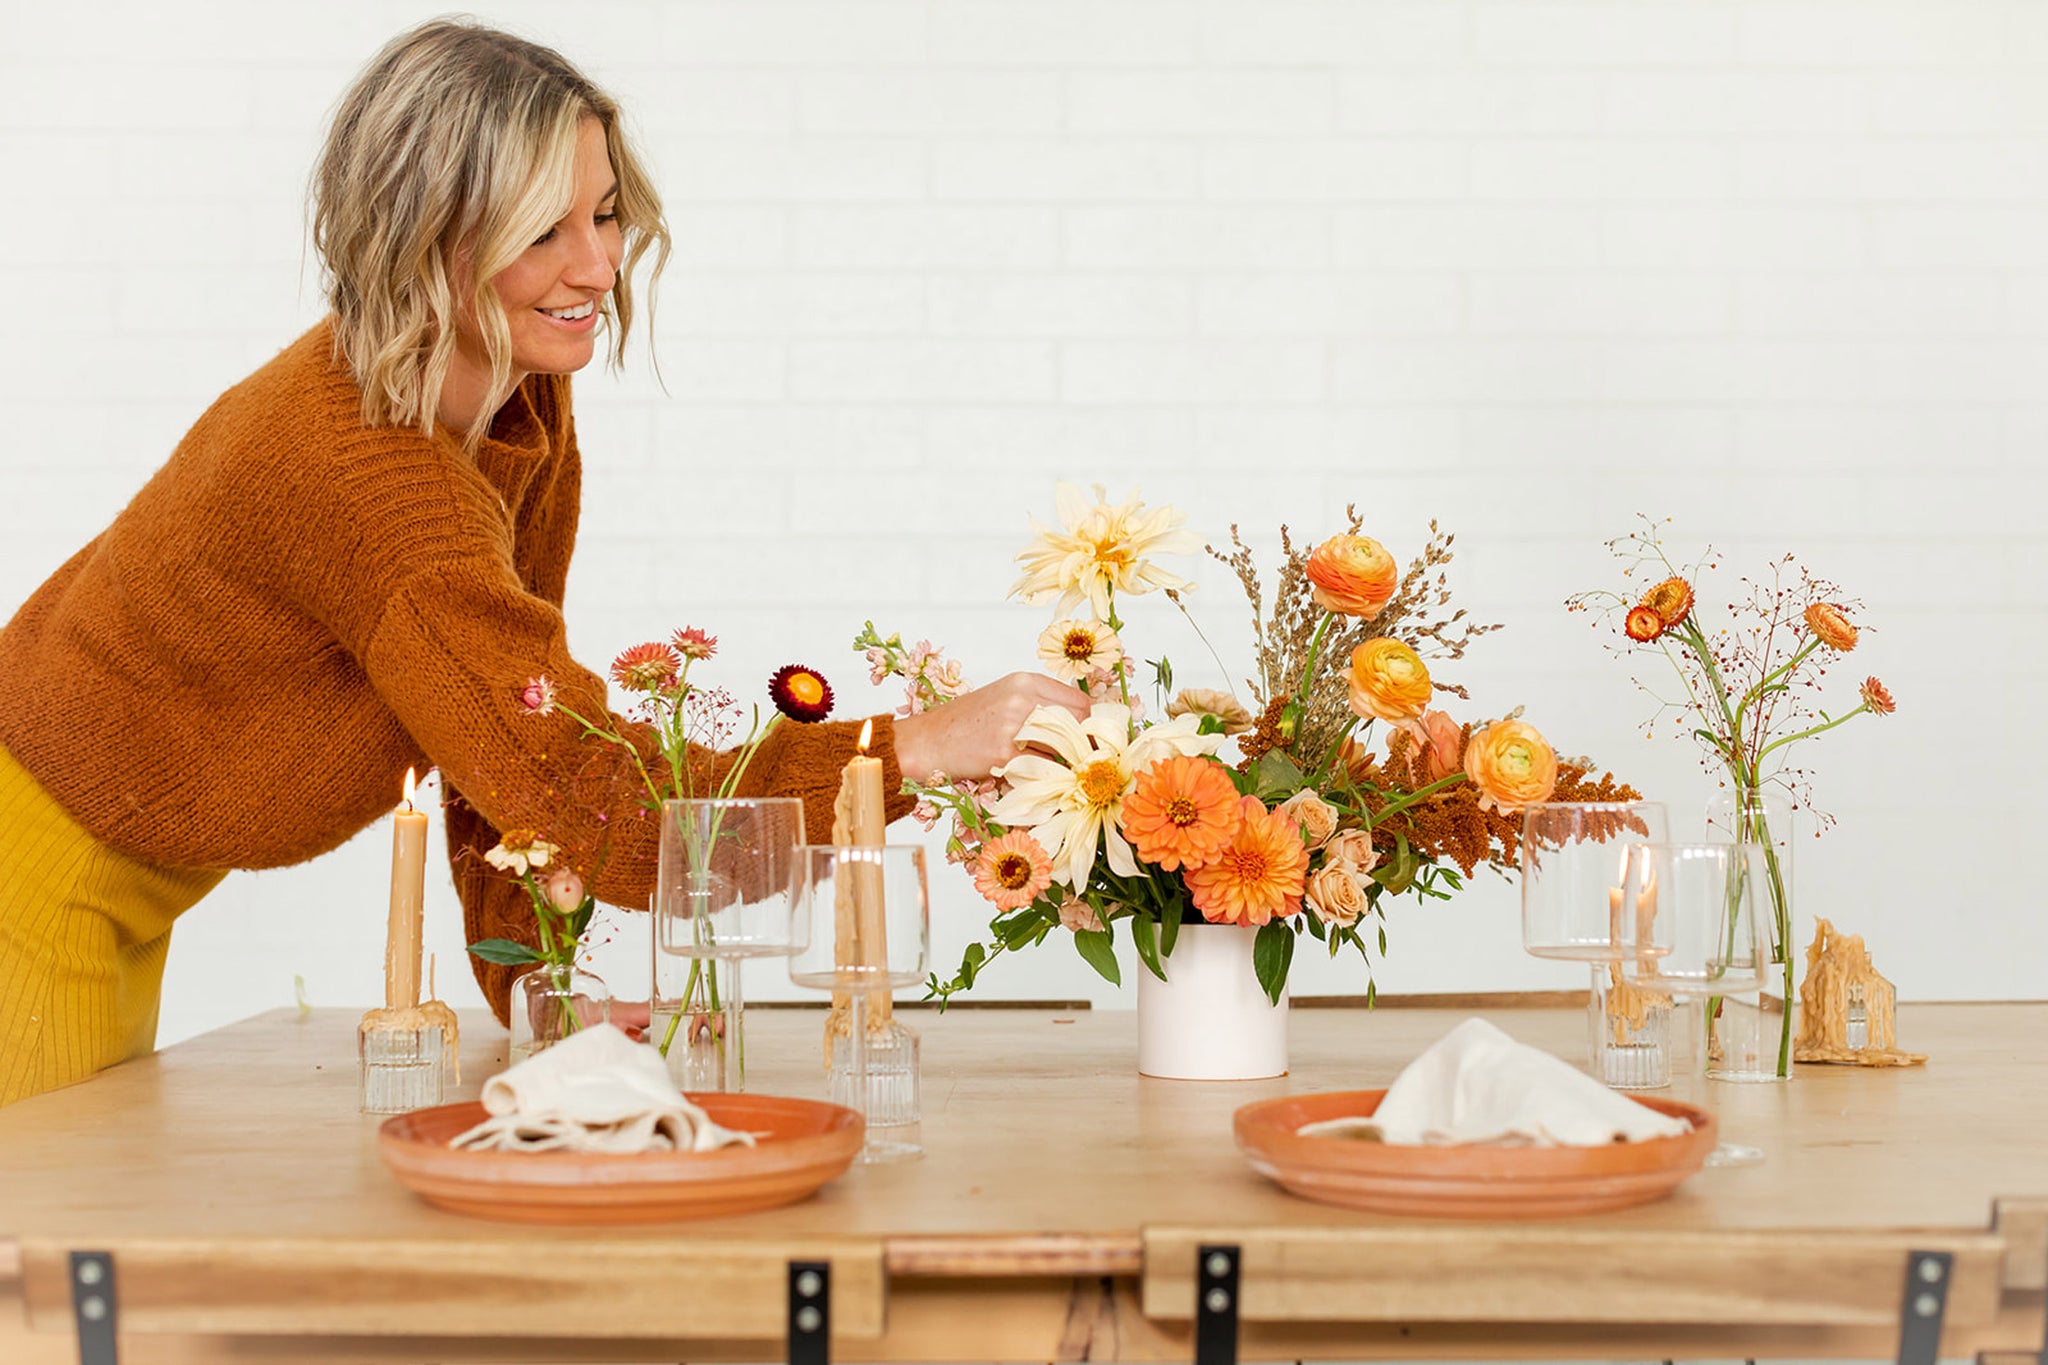 Woman adjusting Thanksgiving flowers in a vase on a table